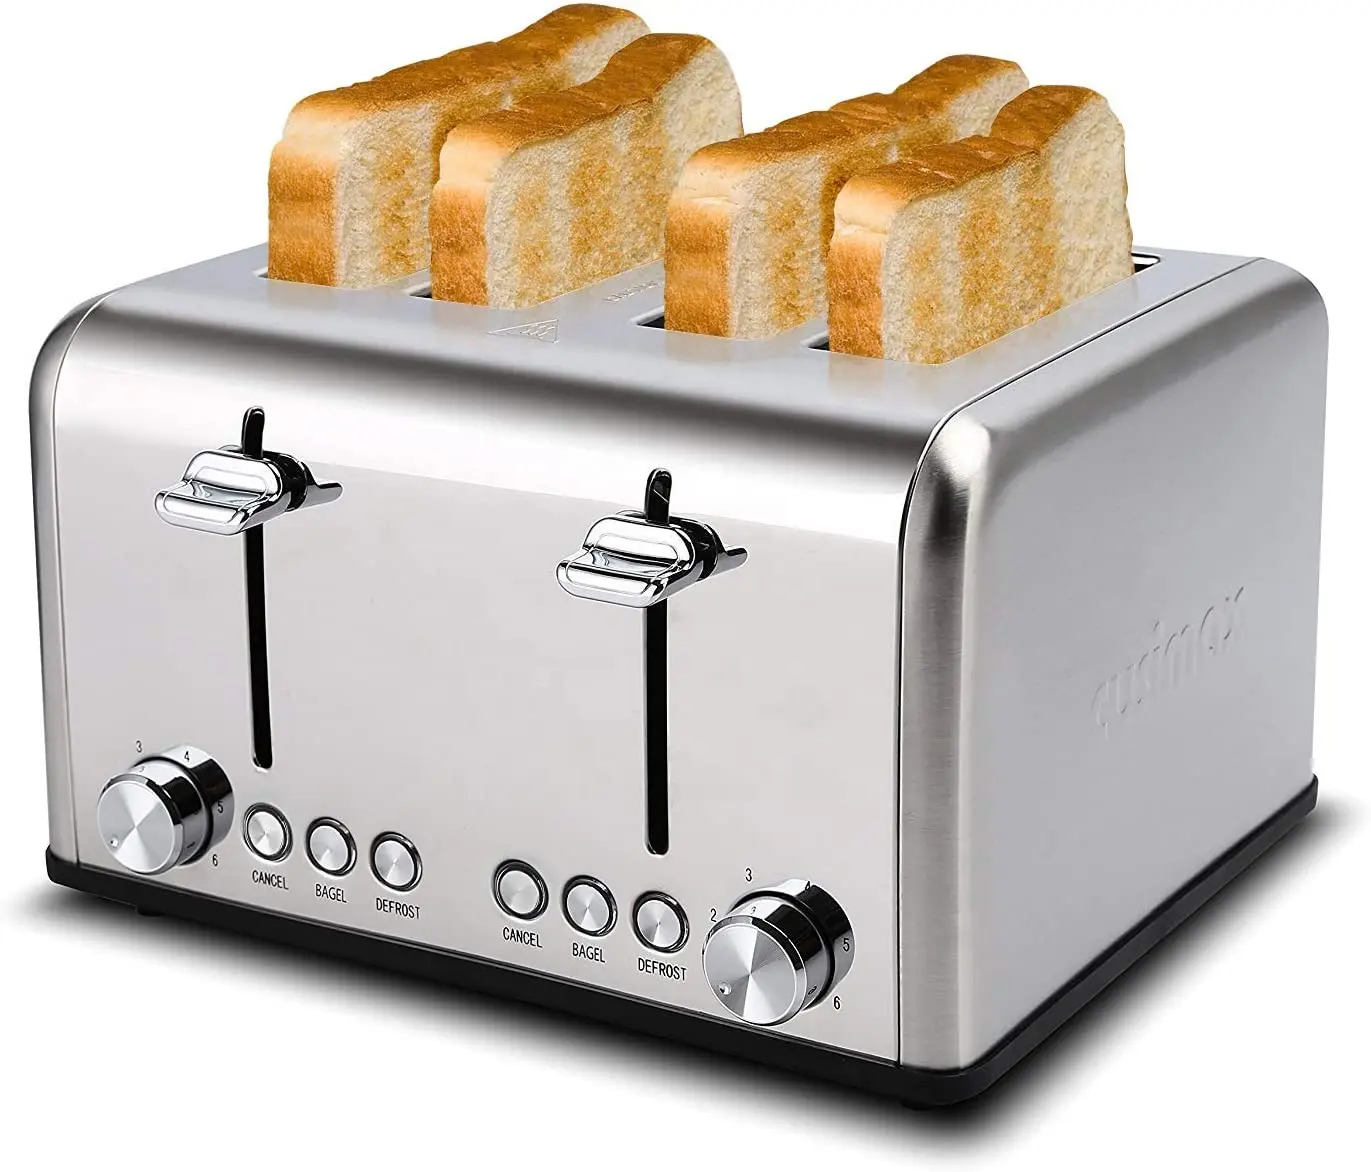 2022 Hot sale 2 4 Four slice toaster electric smart bread toaster for home use with certifications